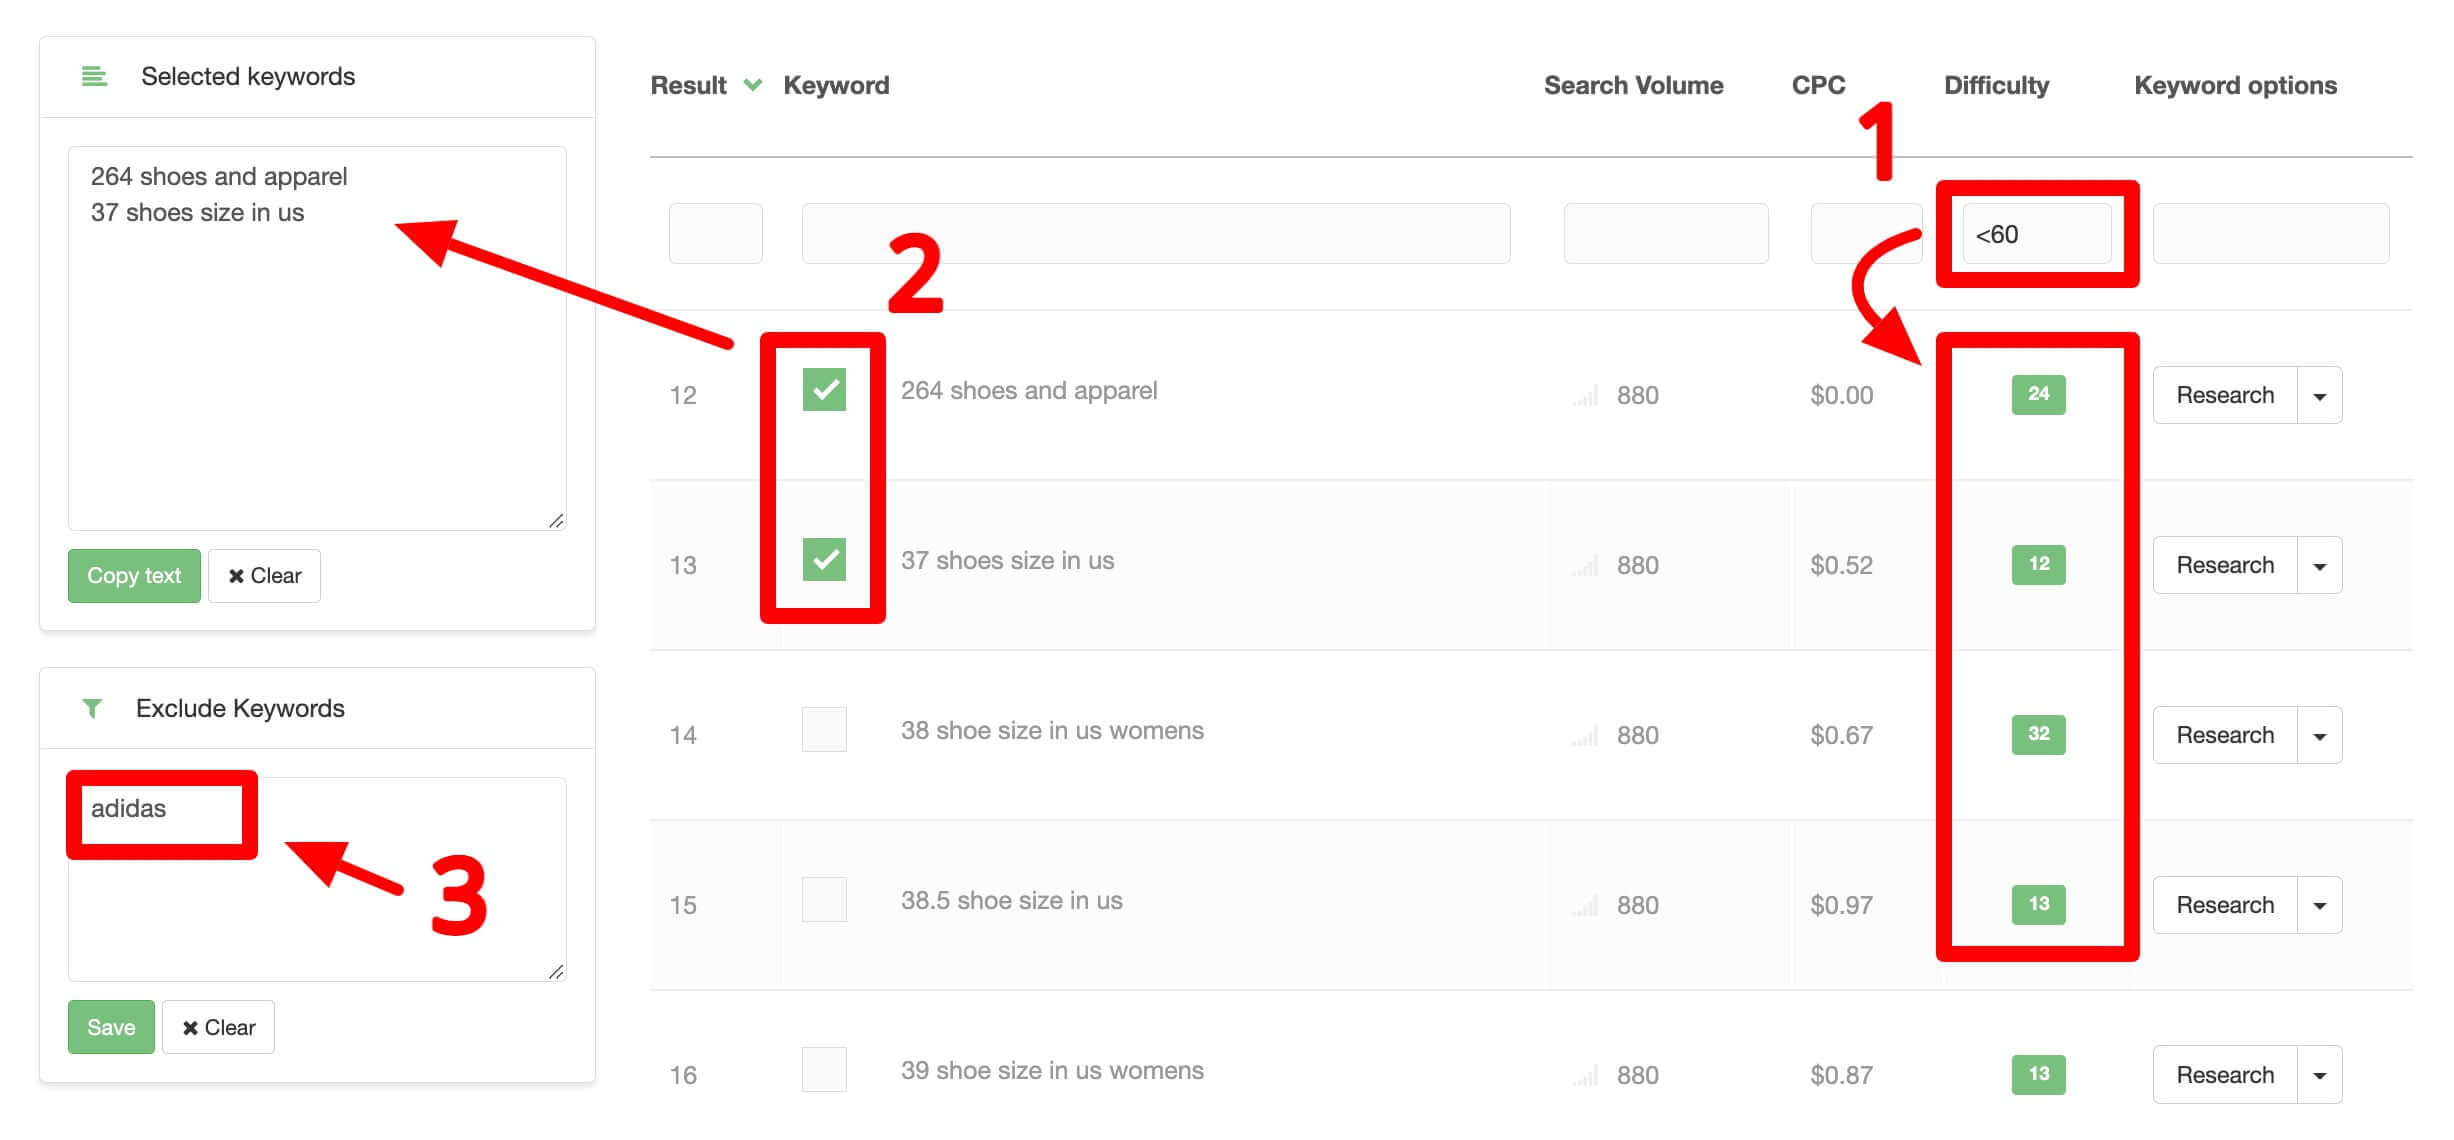 Filter, select, and exclude keywords from the results